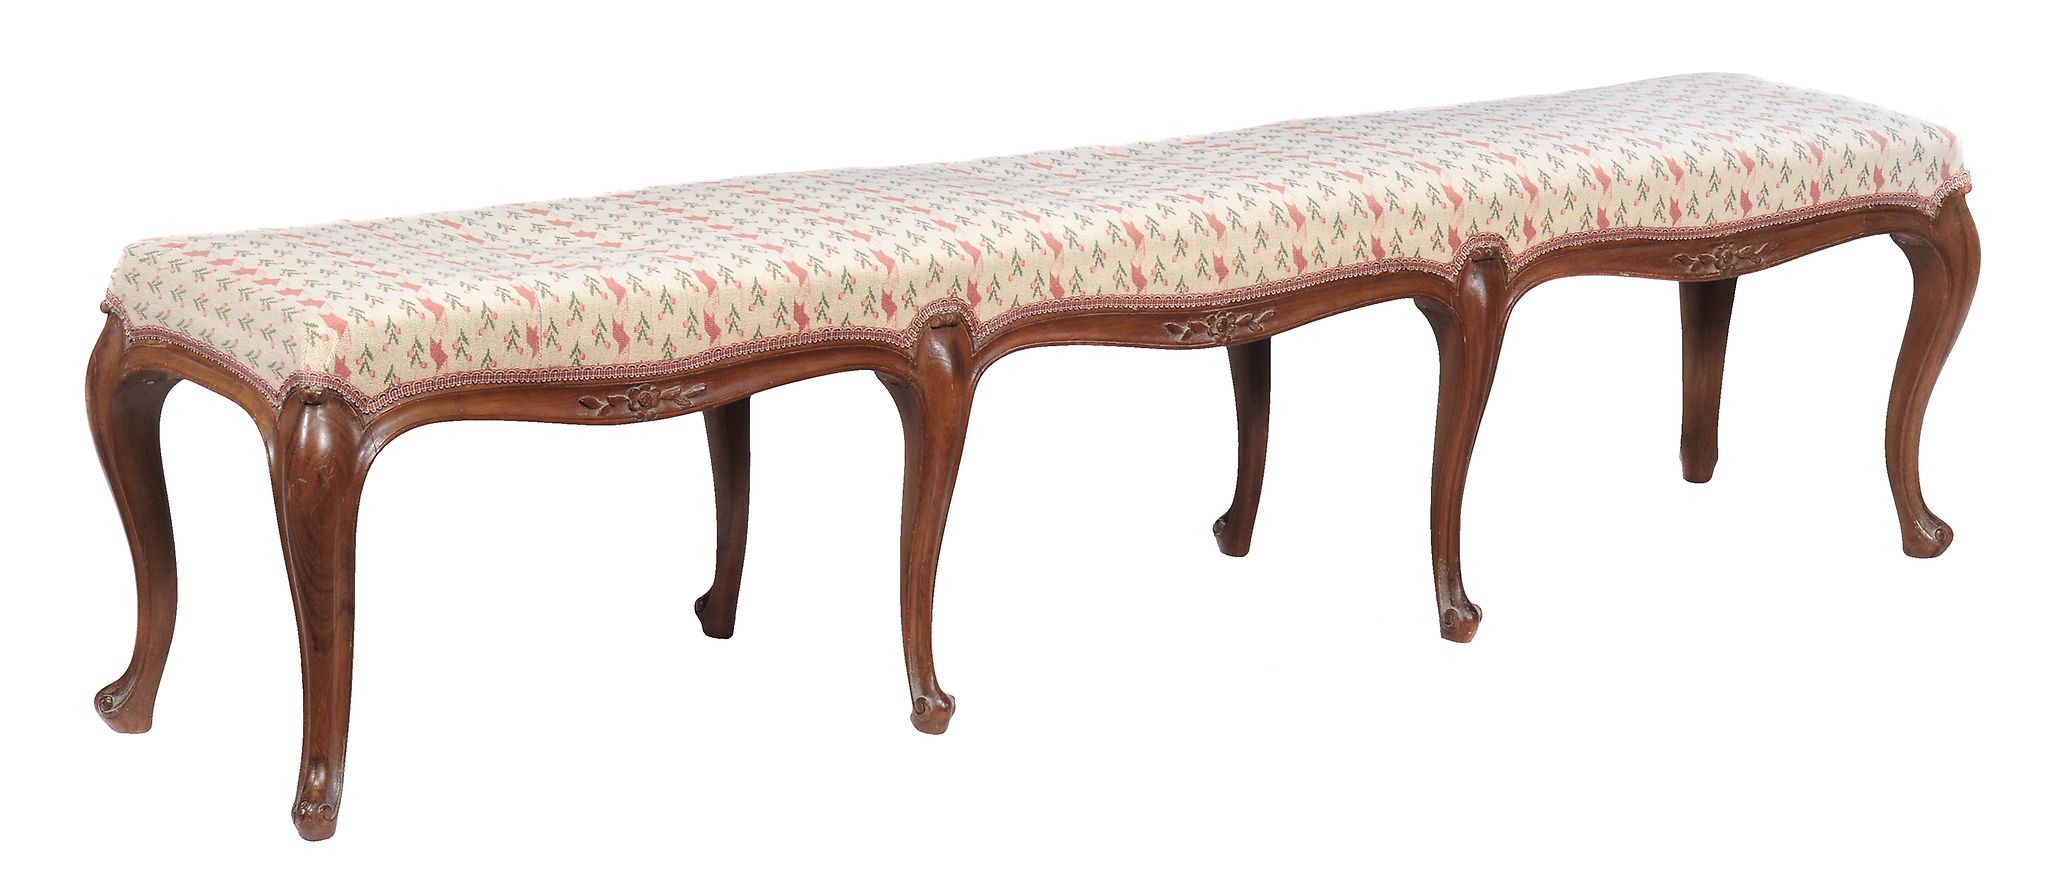 A carved beech and upholstered stool , in mid 18th century Continental style  A carved beech and